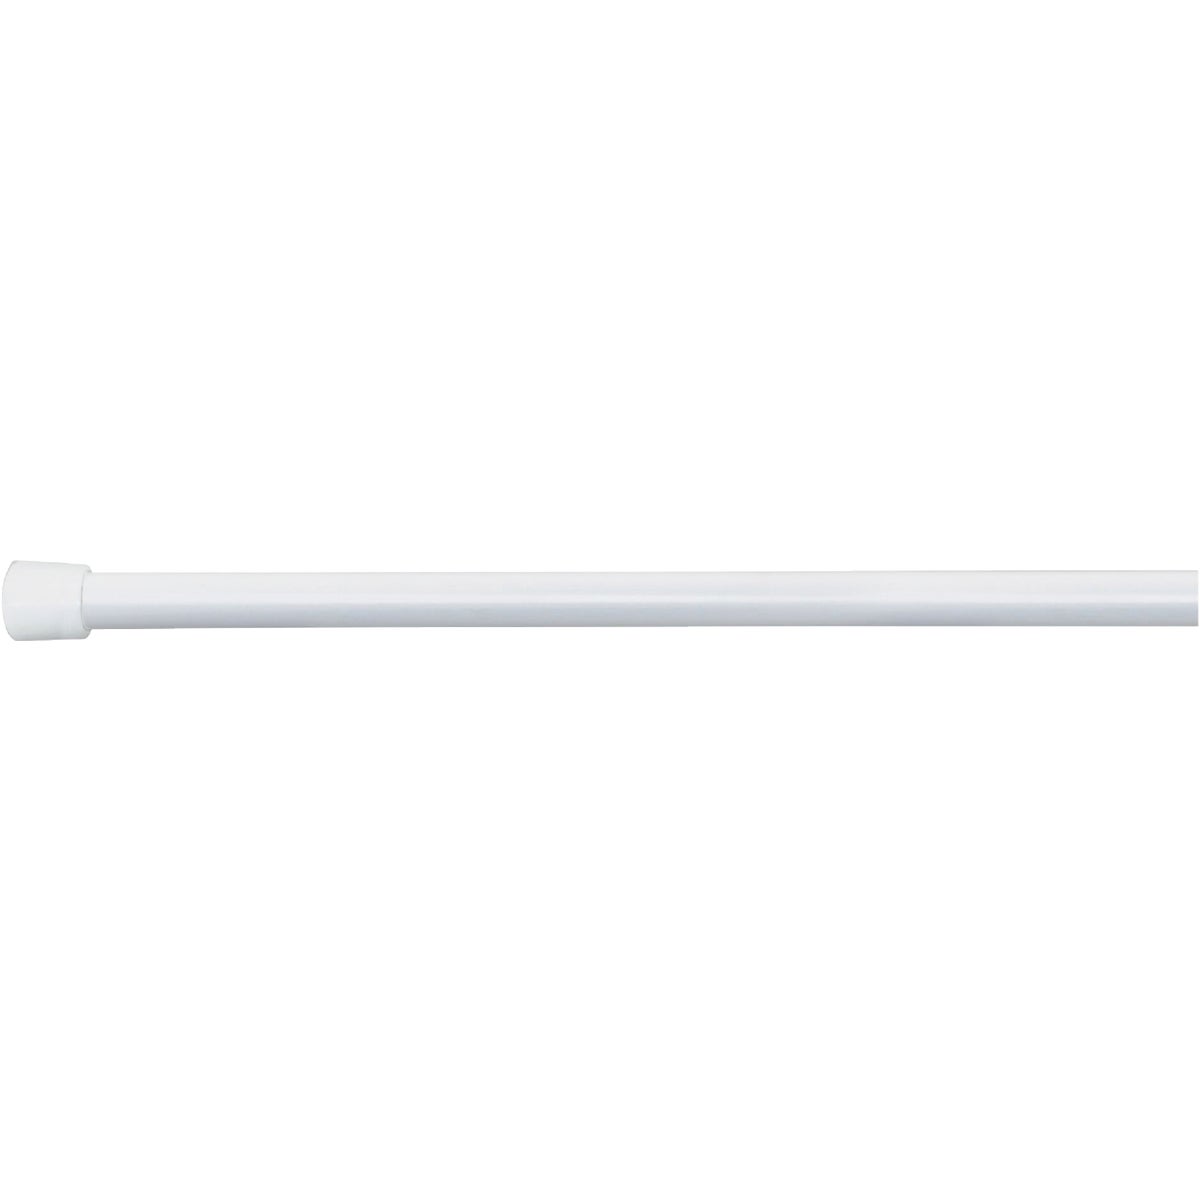 Item 639438, iDesign's Cameo Shower Curtain Tension Rod is strong, attractive and 